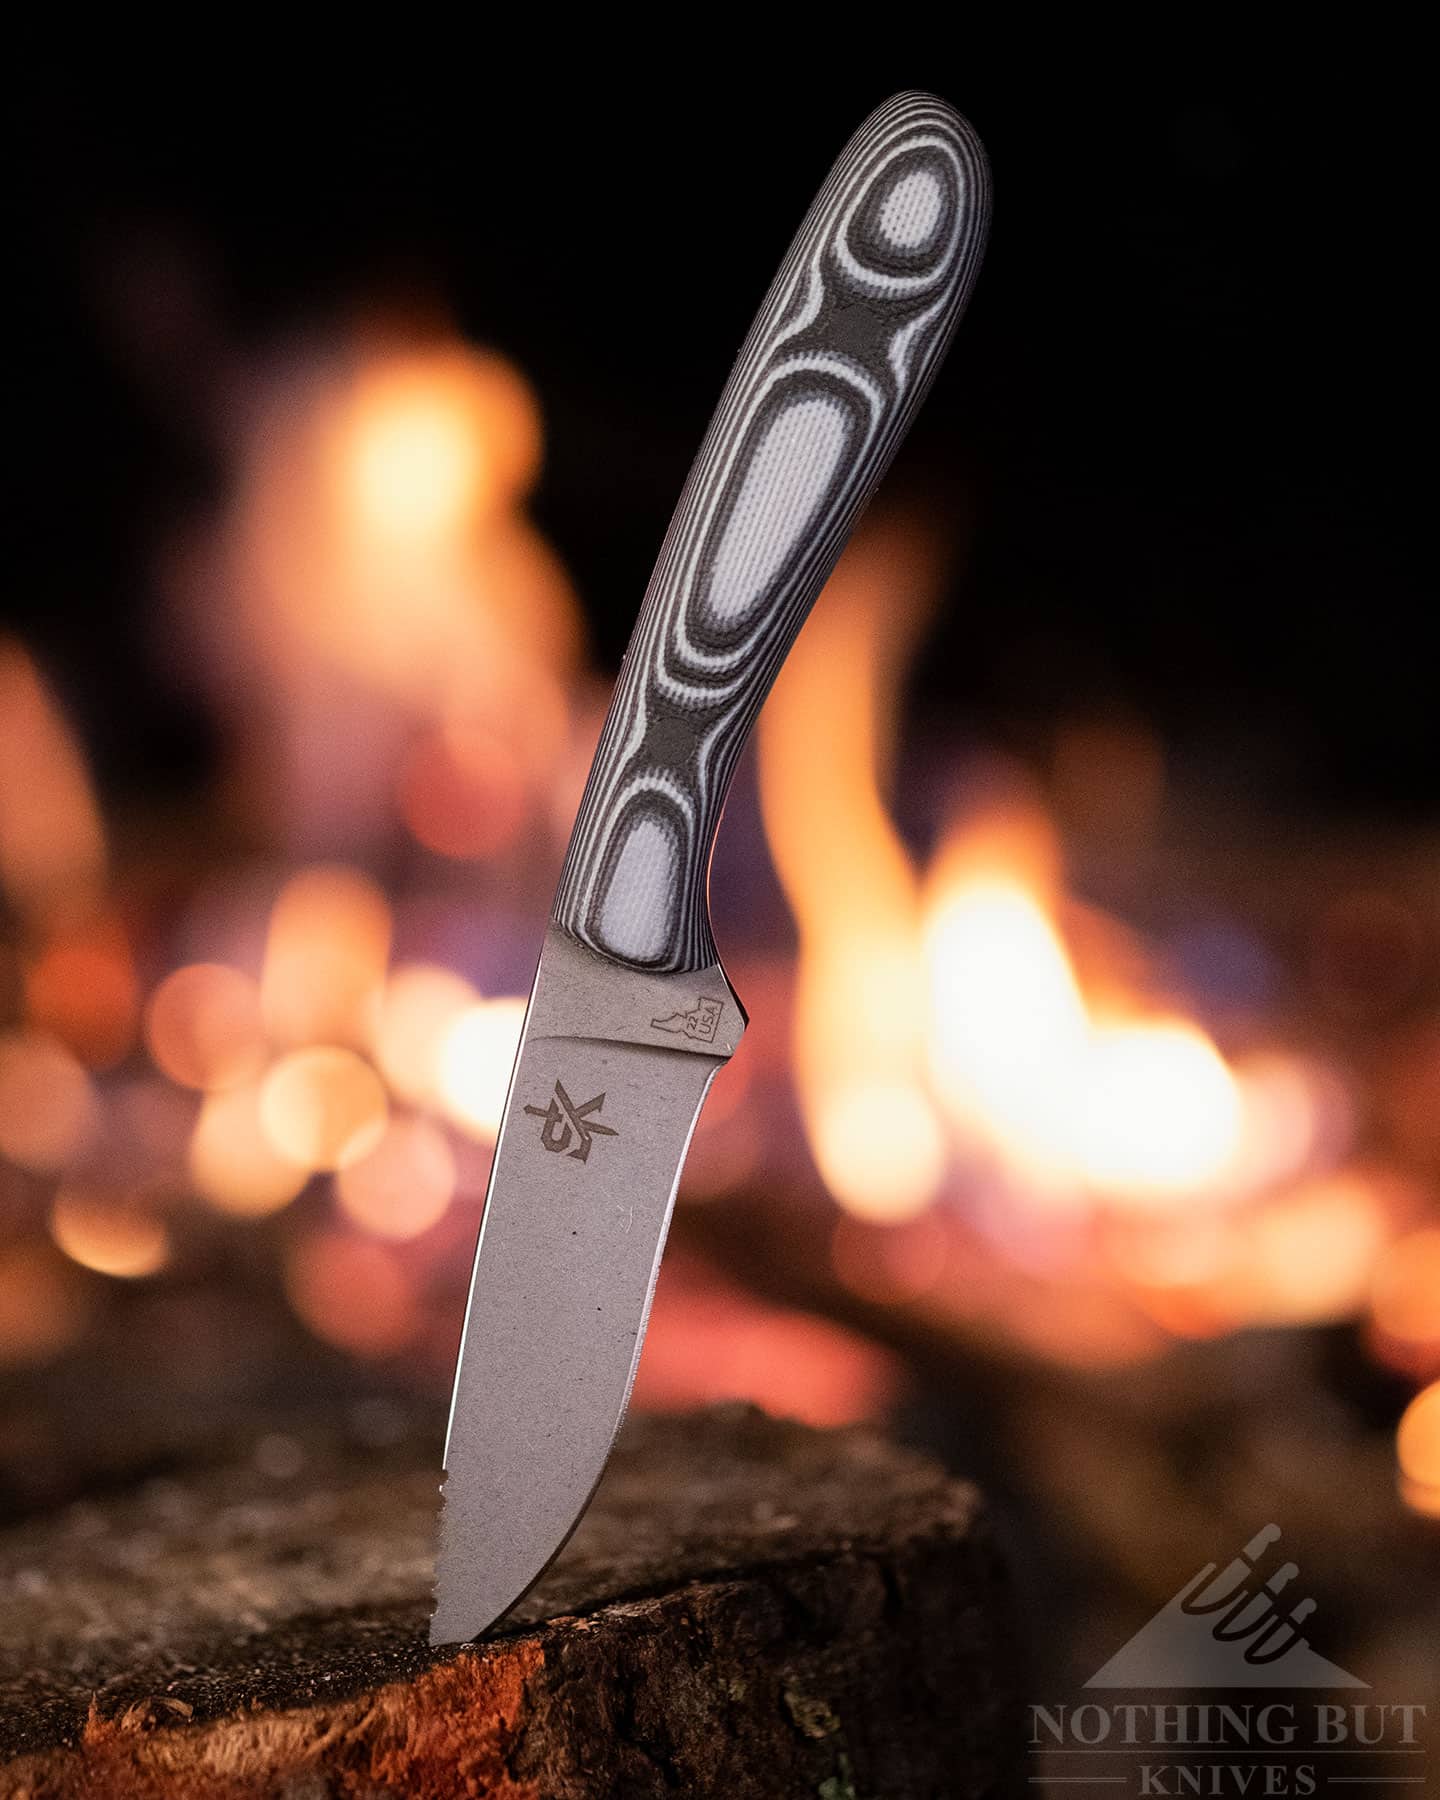 The Schenk Knives Pitka won a Drunken Hill Billy Knife Award for The Best Knife You cant's Buy.